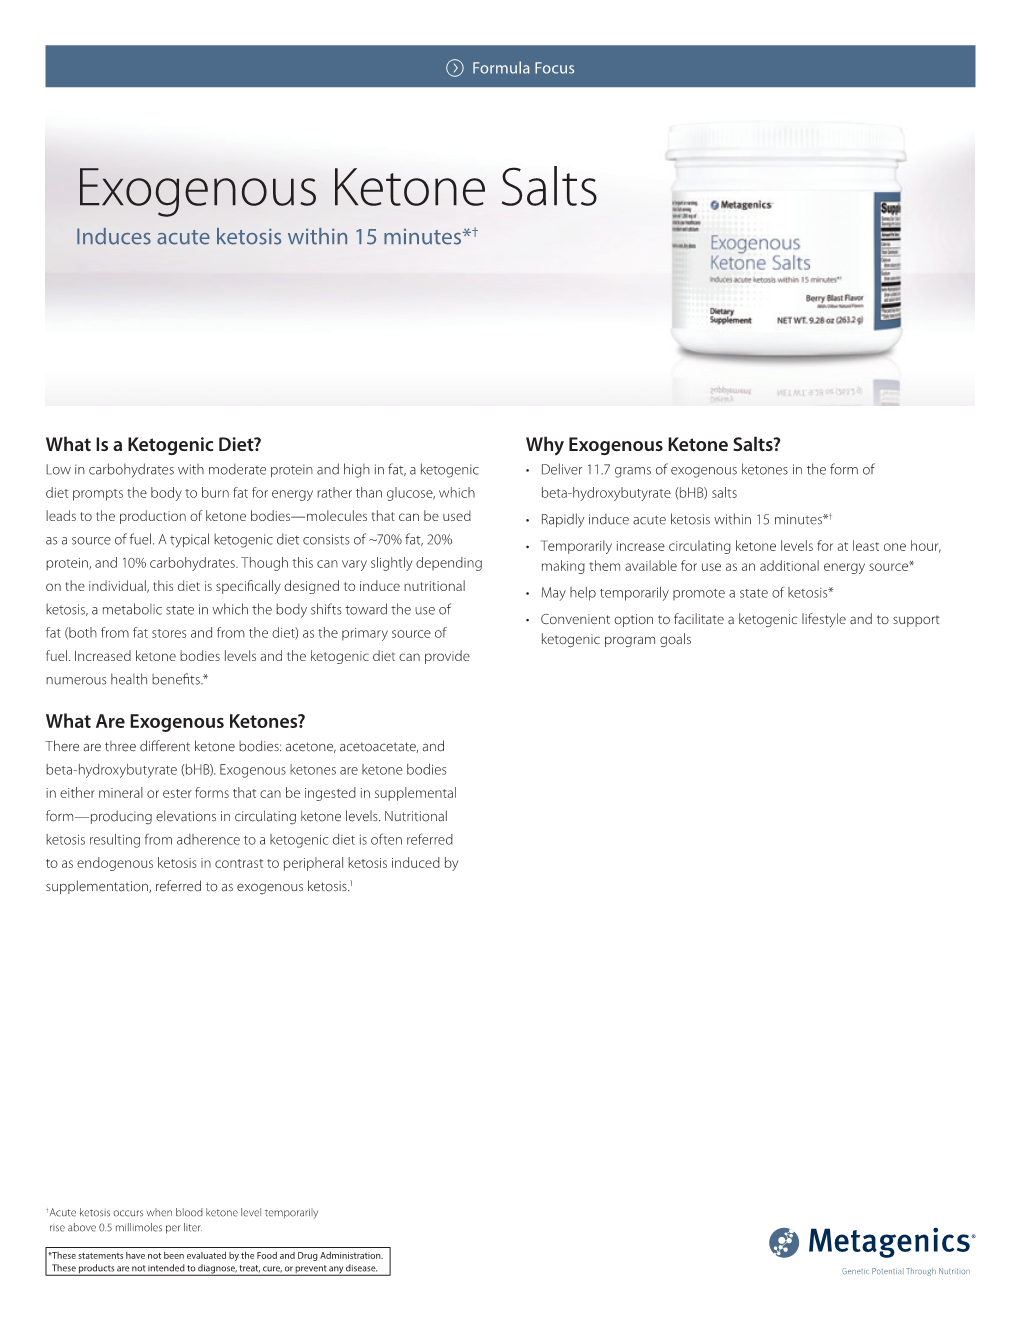 Exogenous Ketone Salts Induces Acute Ketosis Within 15 Minutes*†